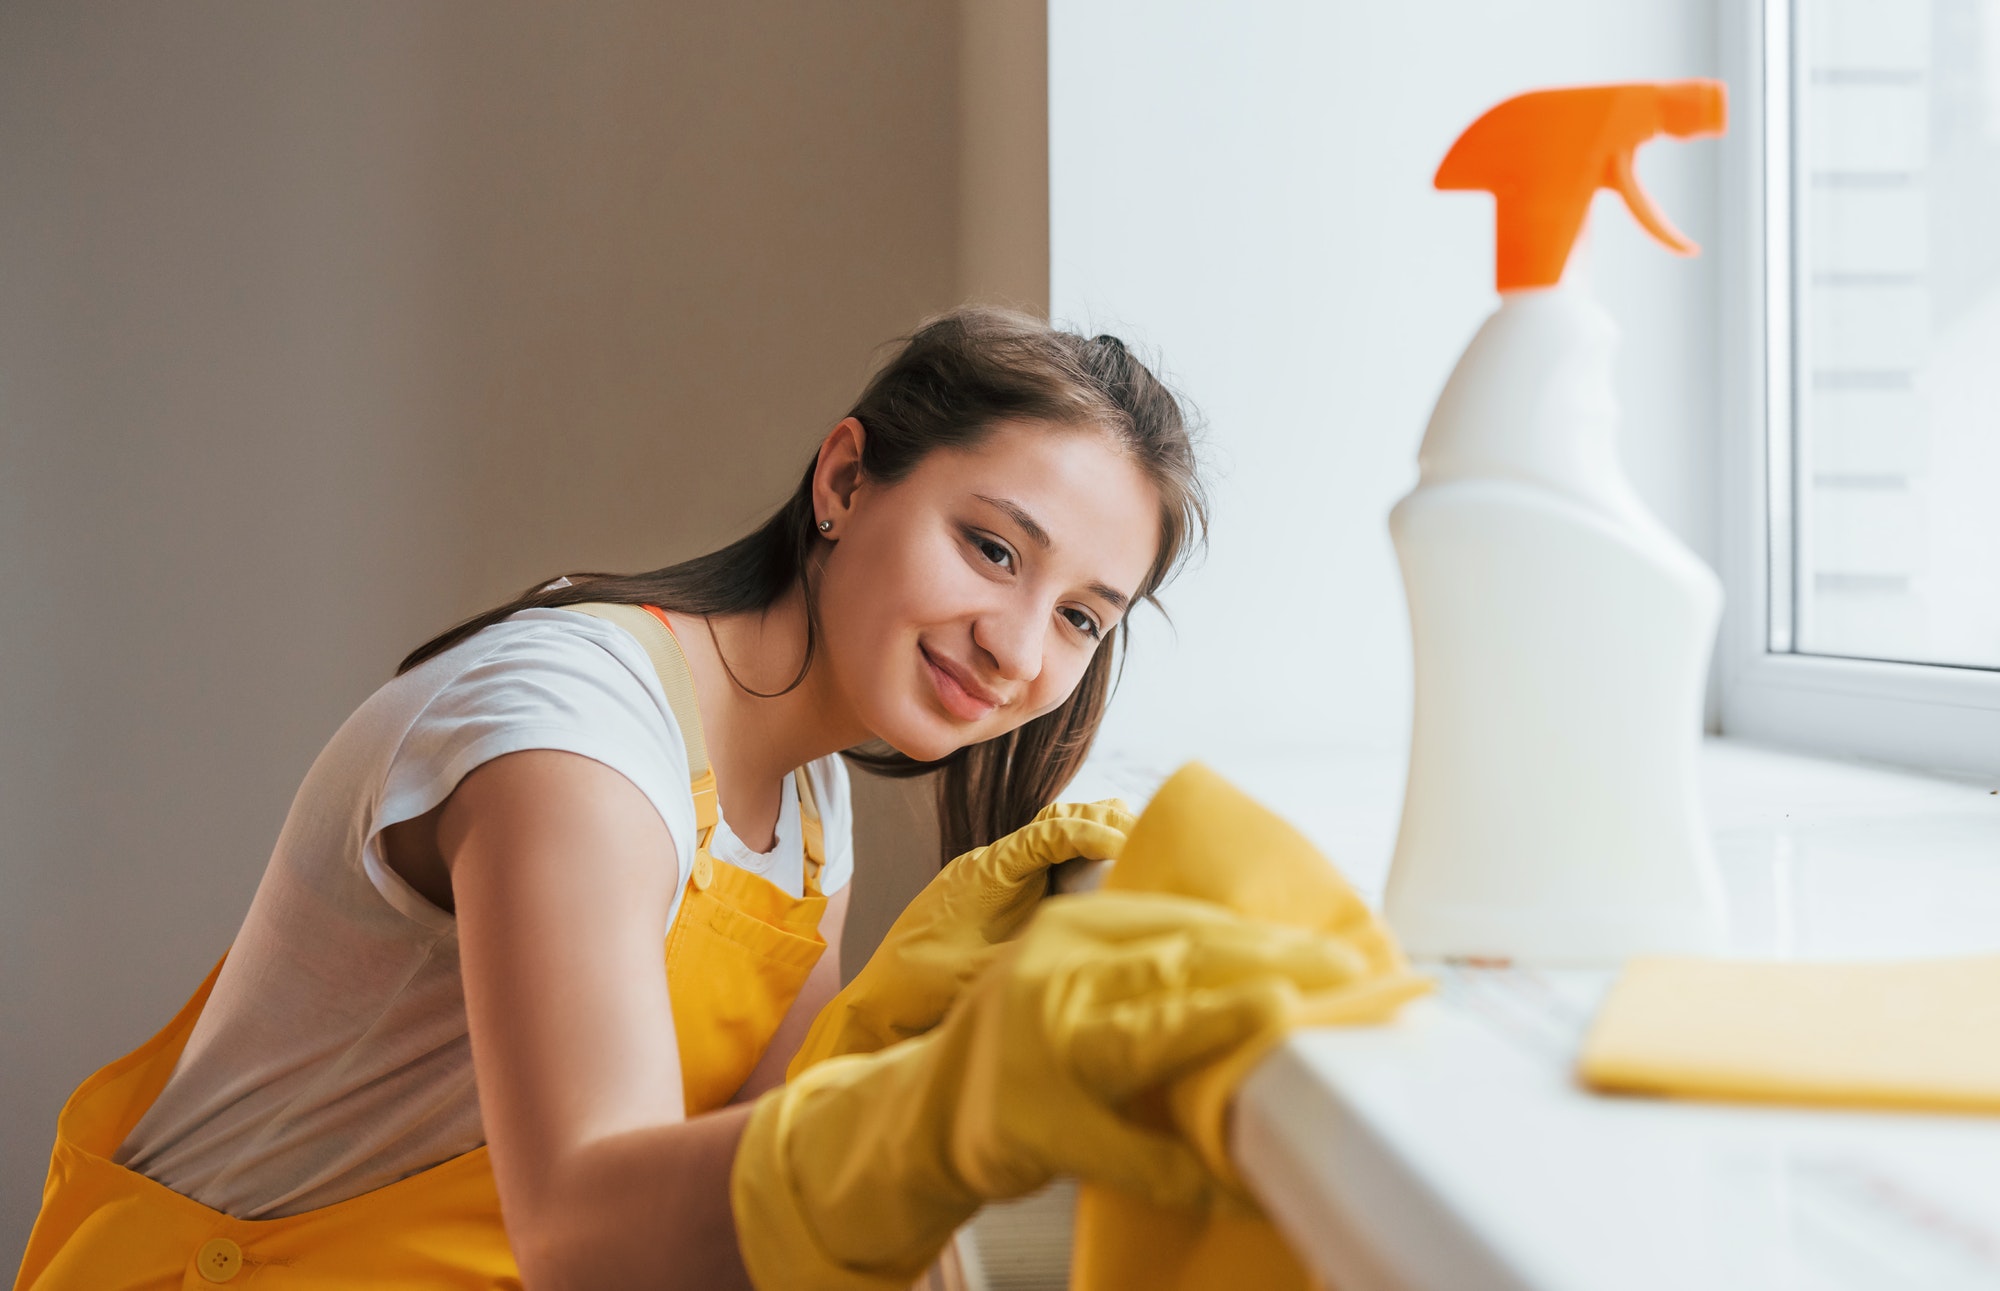 Housewife in yellow uniform works with window and surface cleaner indoors